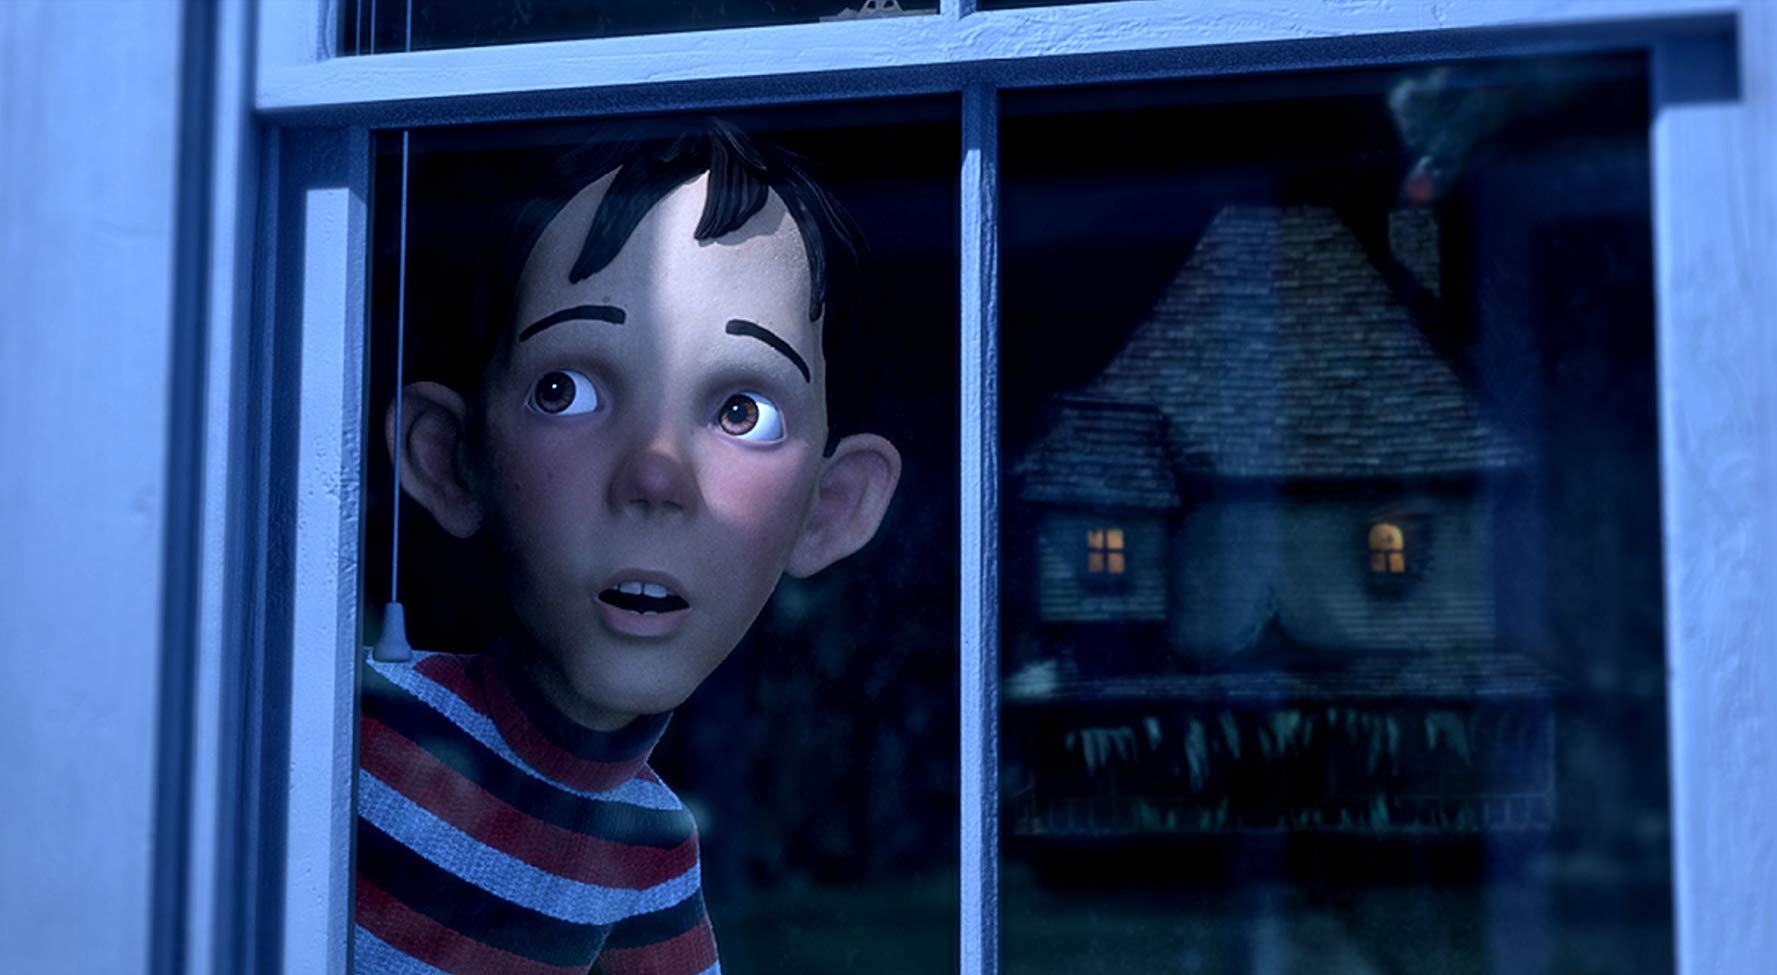 DJ looks out on the Monster House (2006)